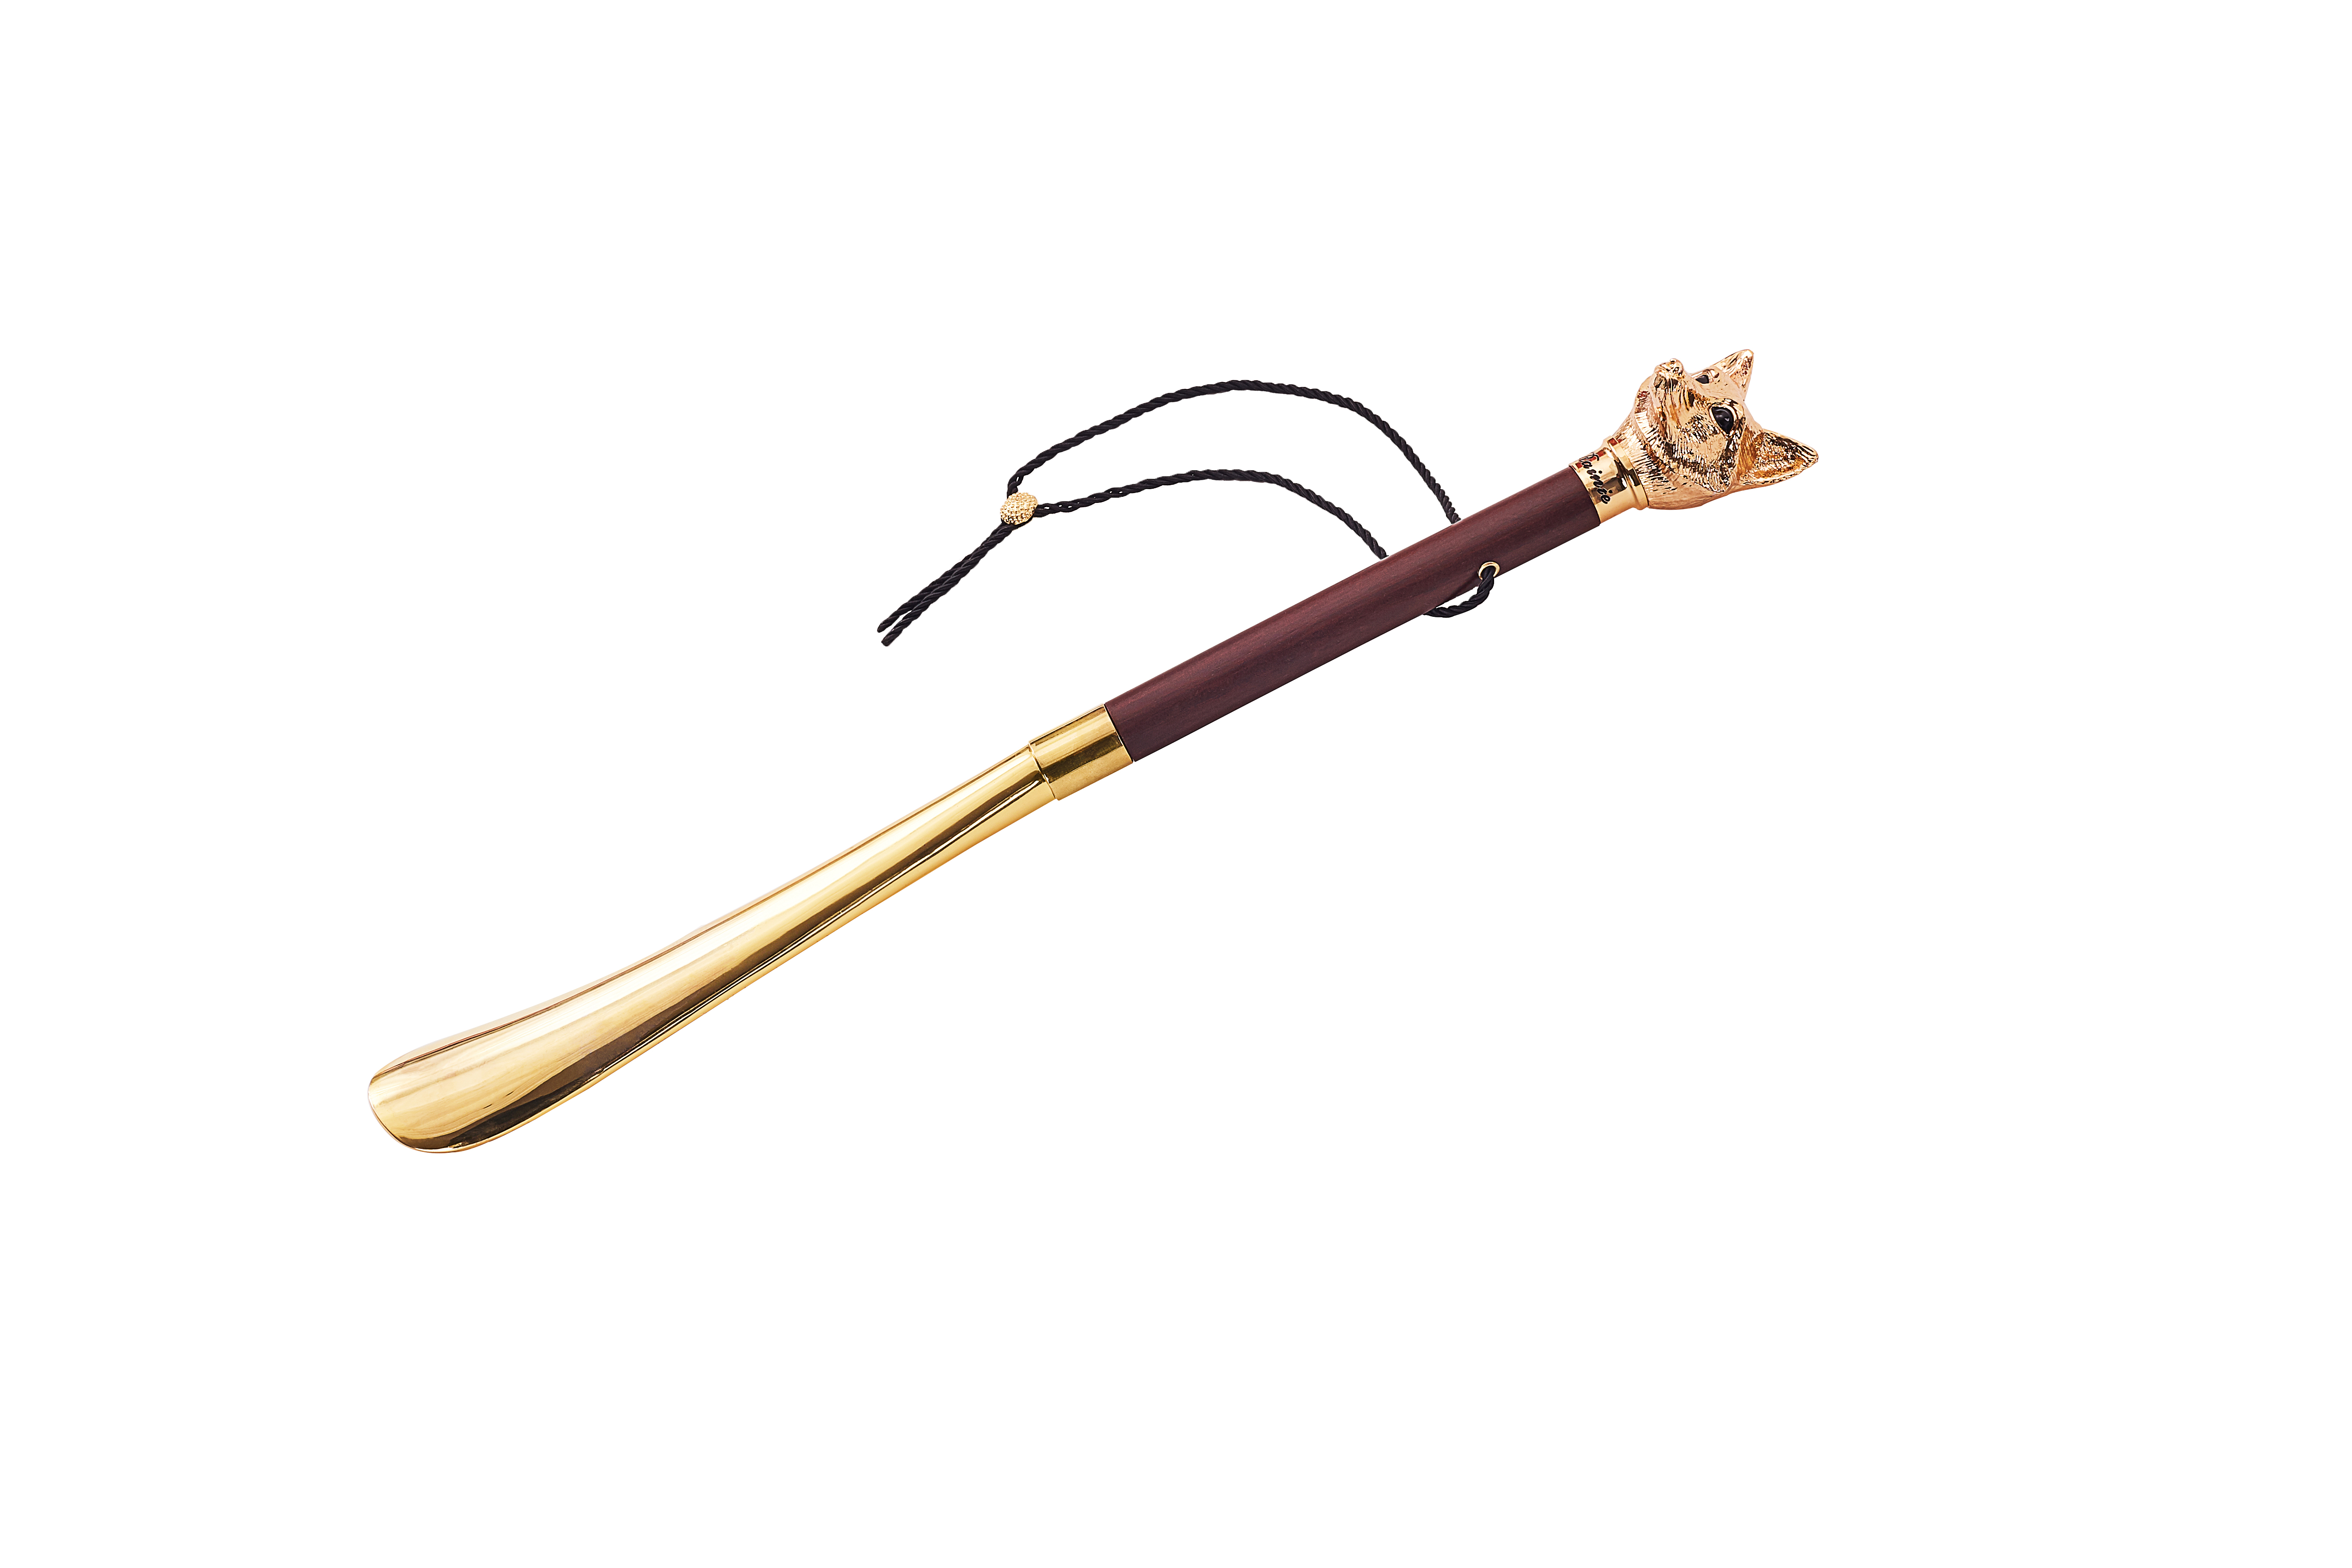 The fox shoehorn